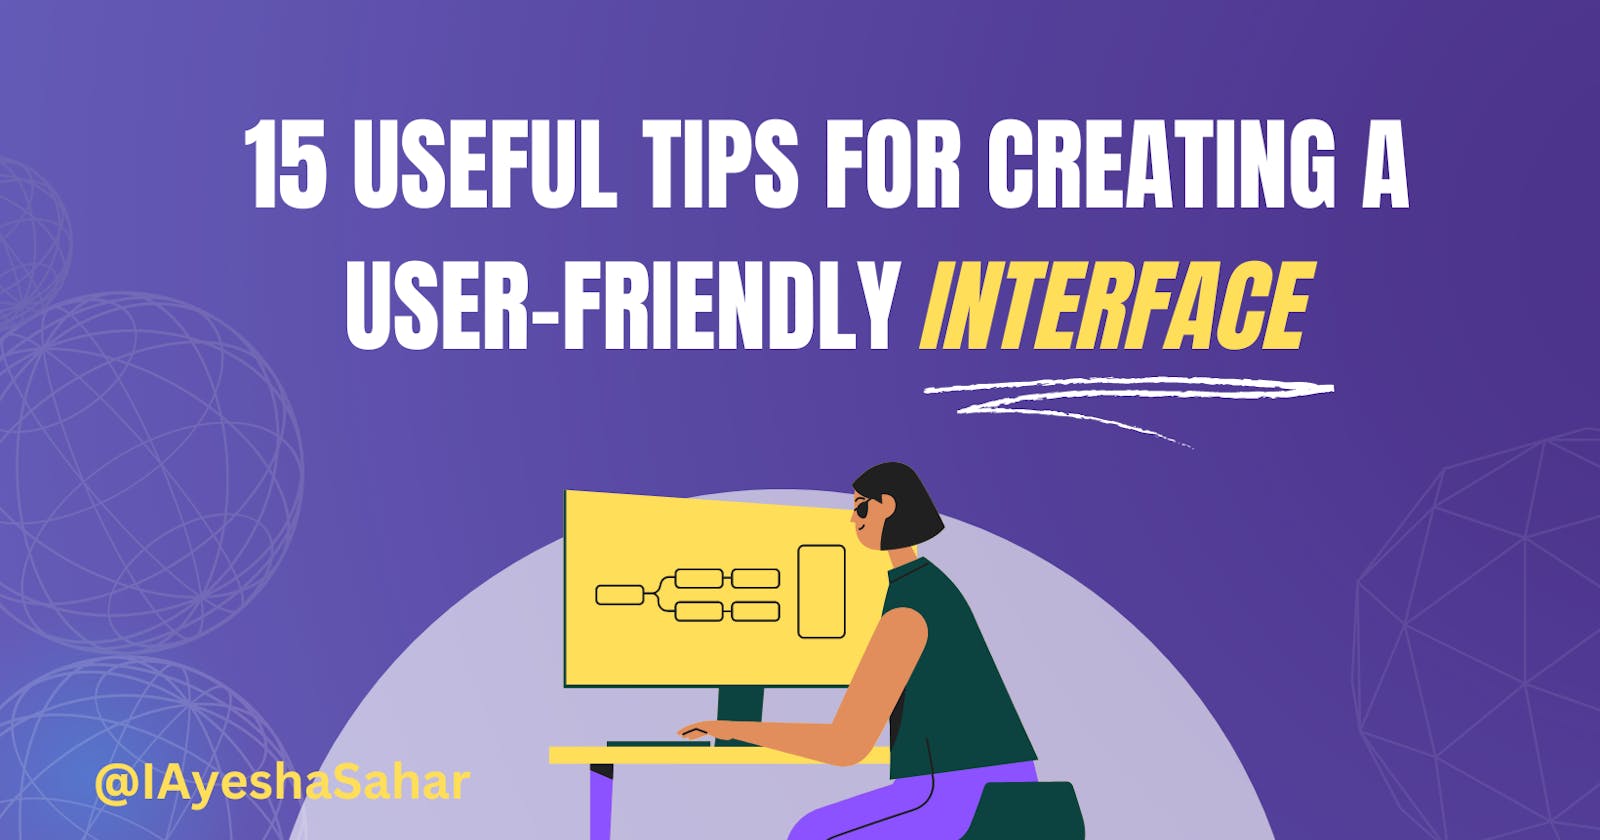 15 Useful Tips for Creating a User-friendly Interface